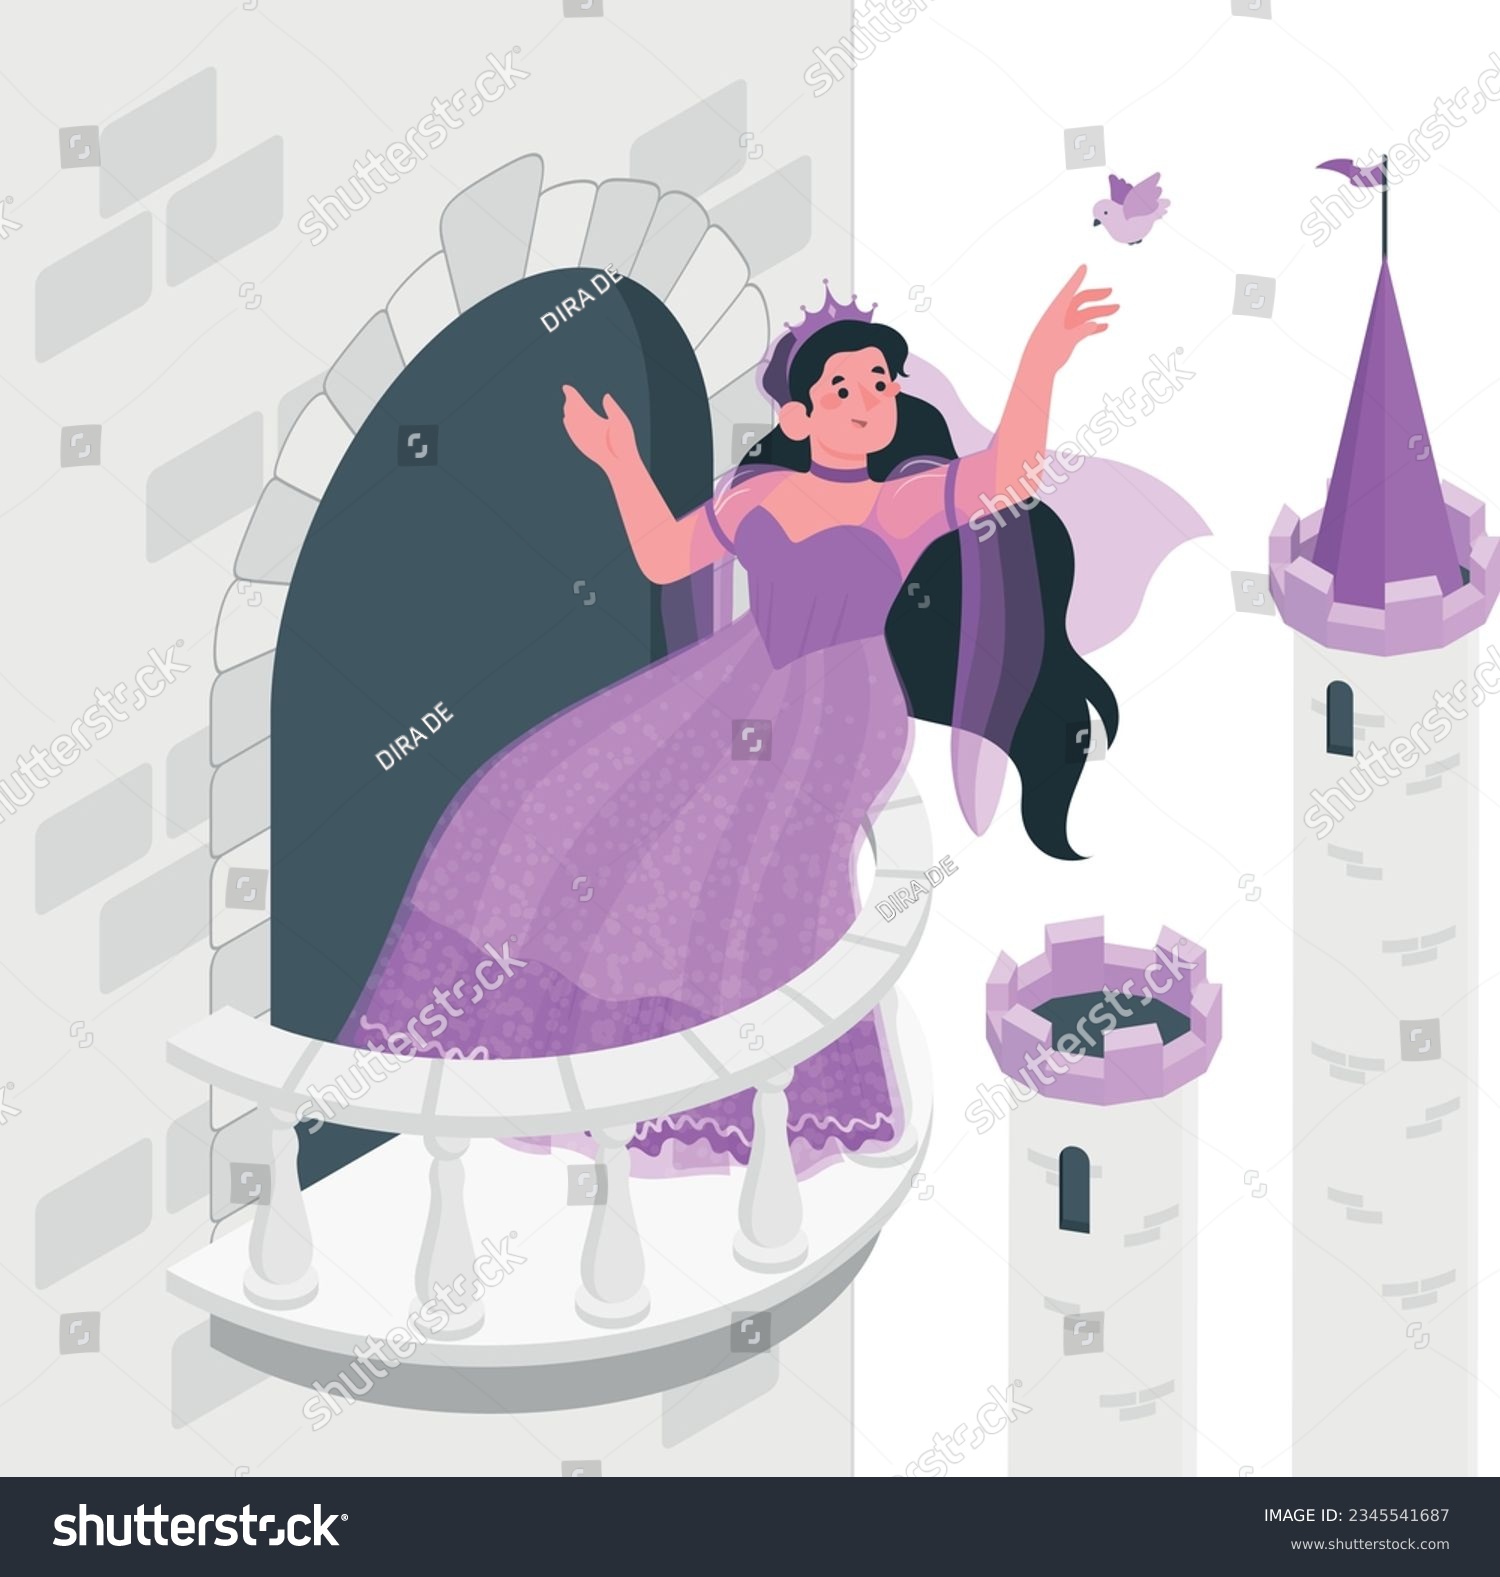 SVG of balcony castle contains a  Disney princess wearing purple dress enjoying air and butterfly vector illustration svg